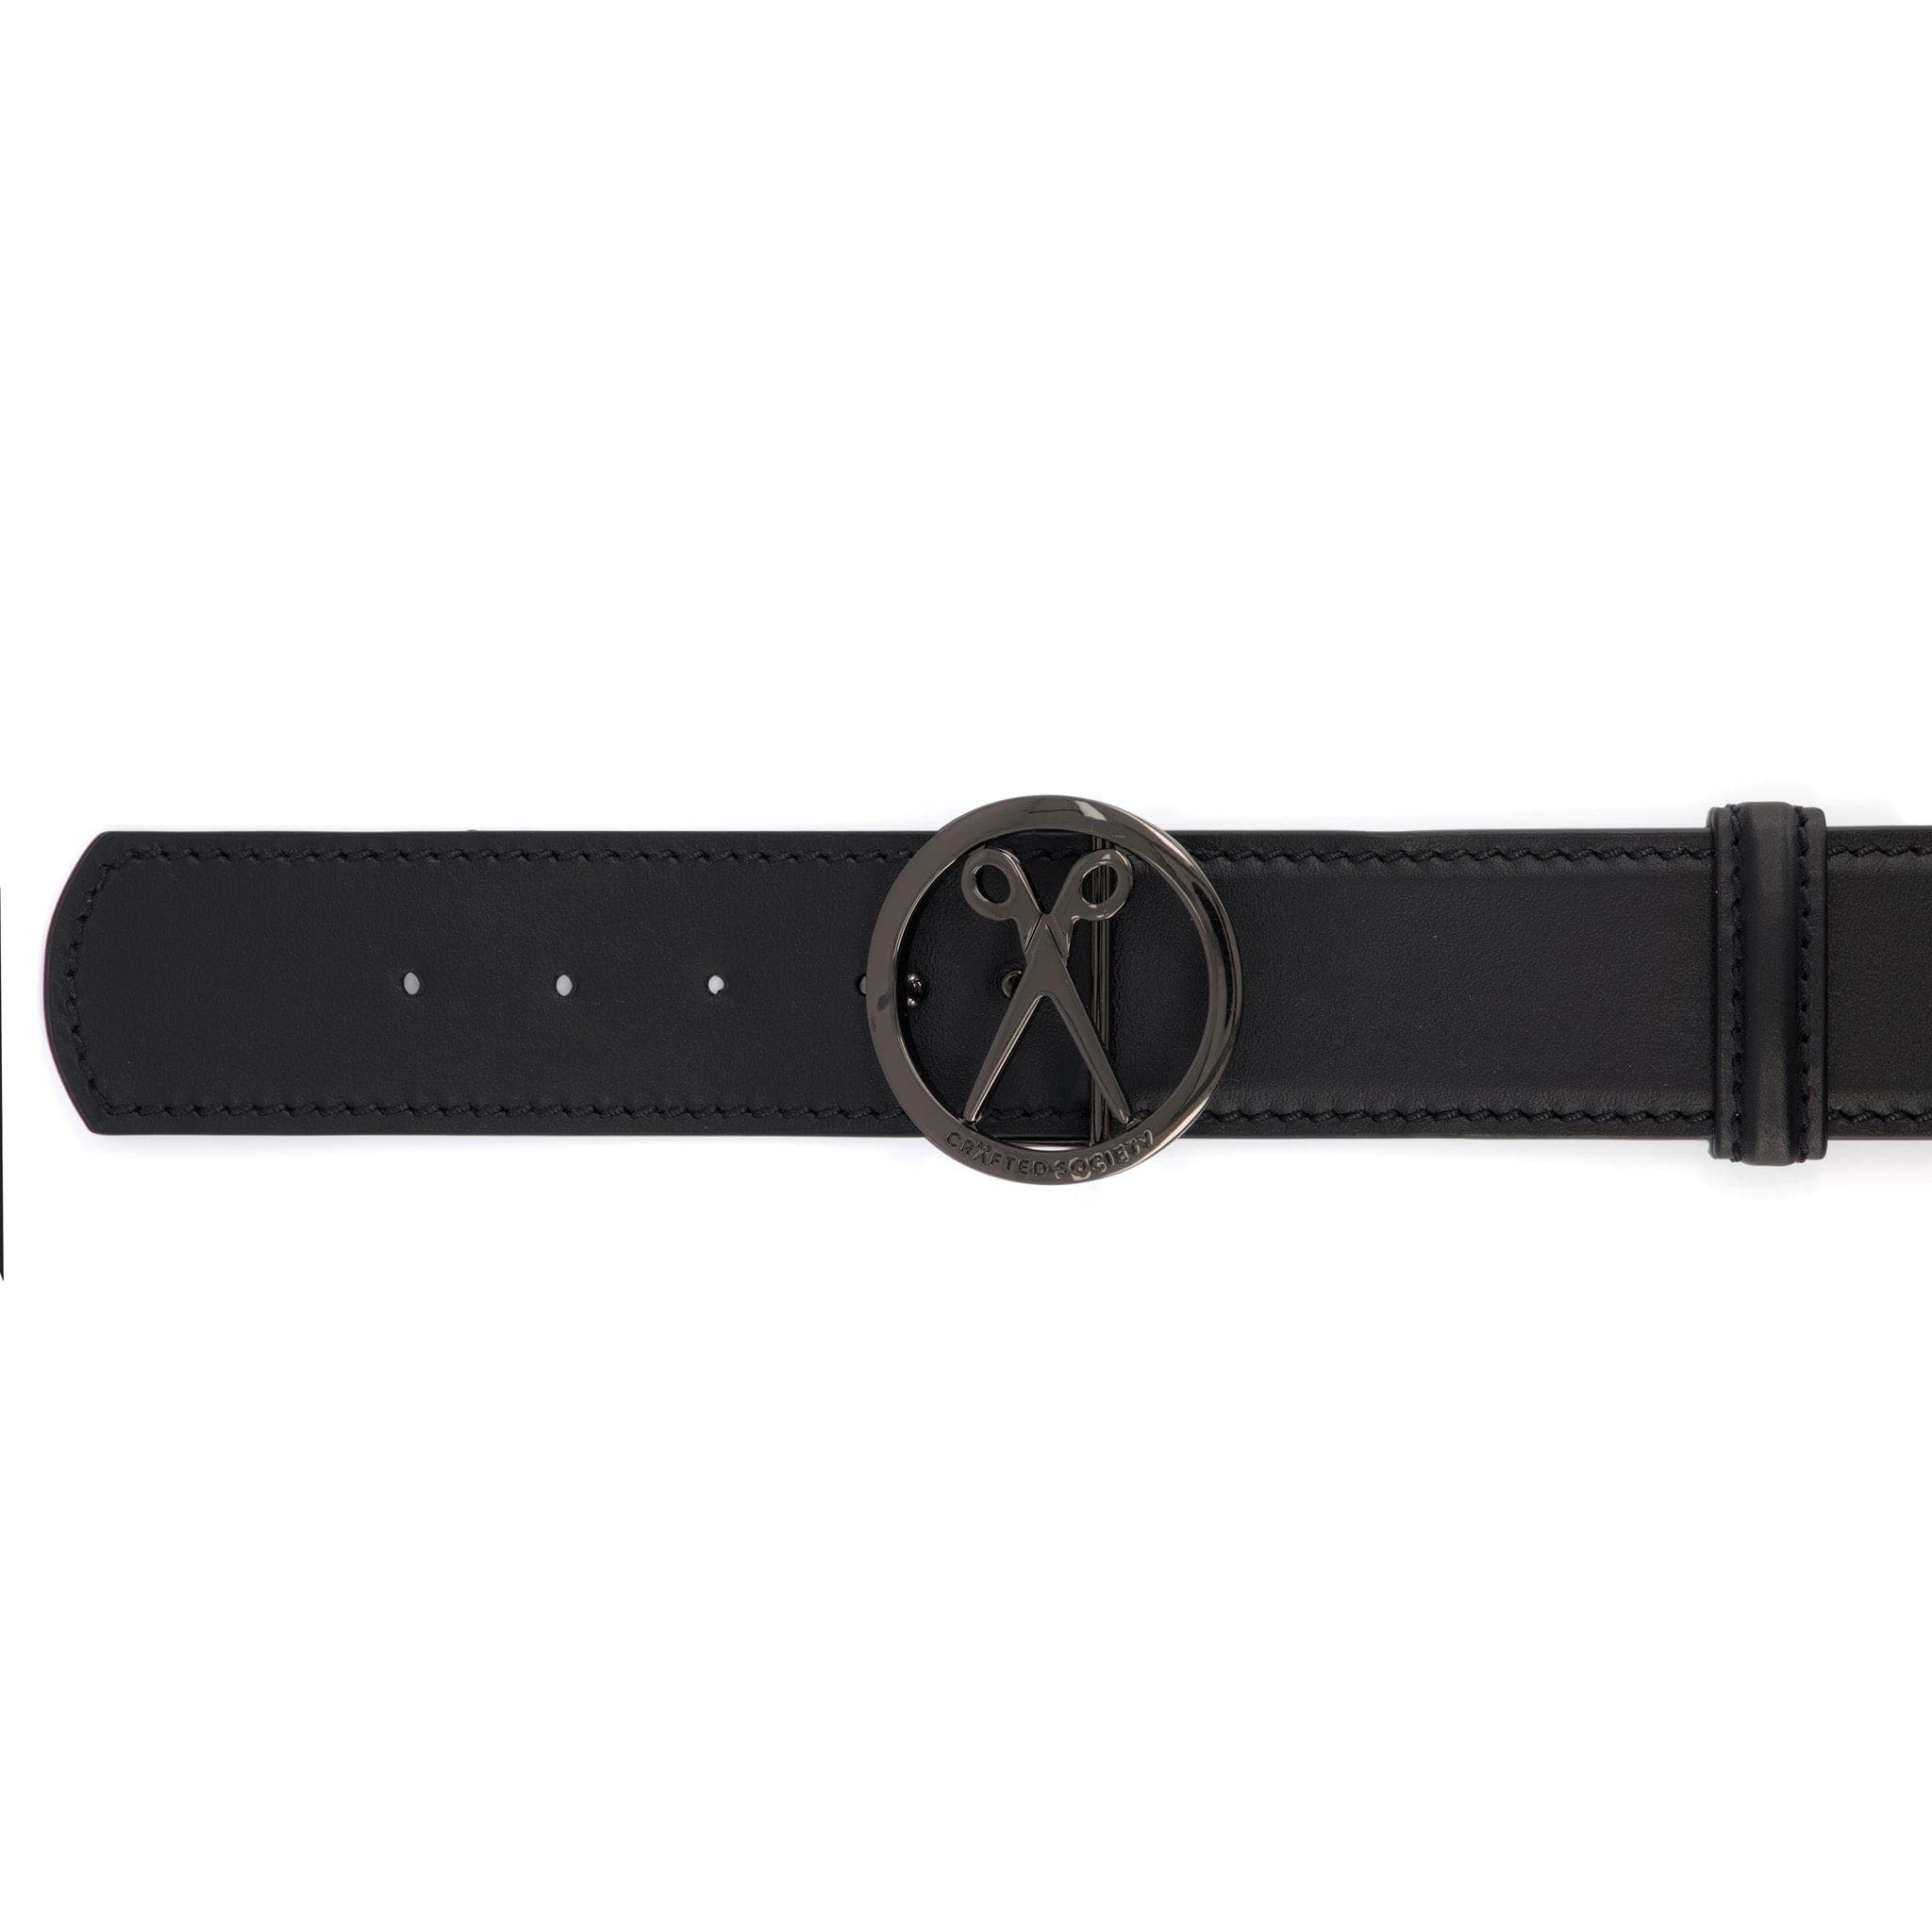 Black Nappa Leather Belt | 4.0cm | 2 Buckles | Made in Italy